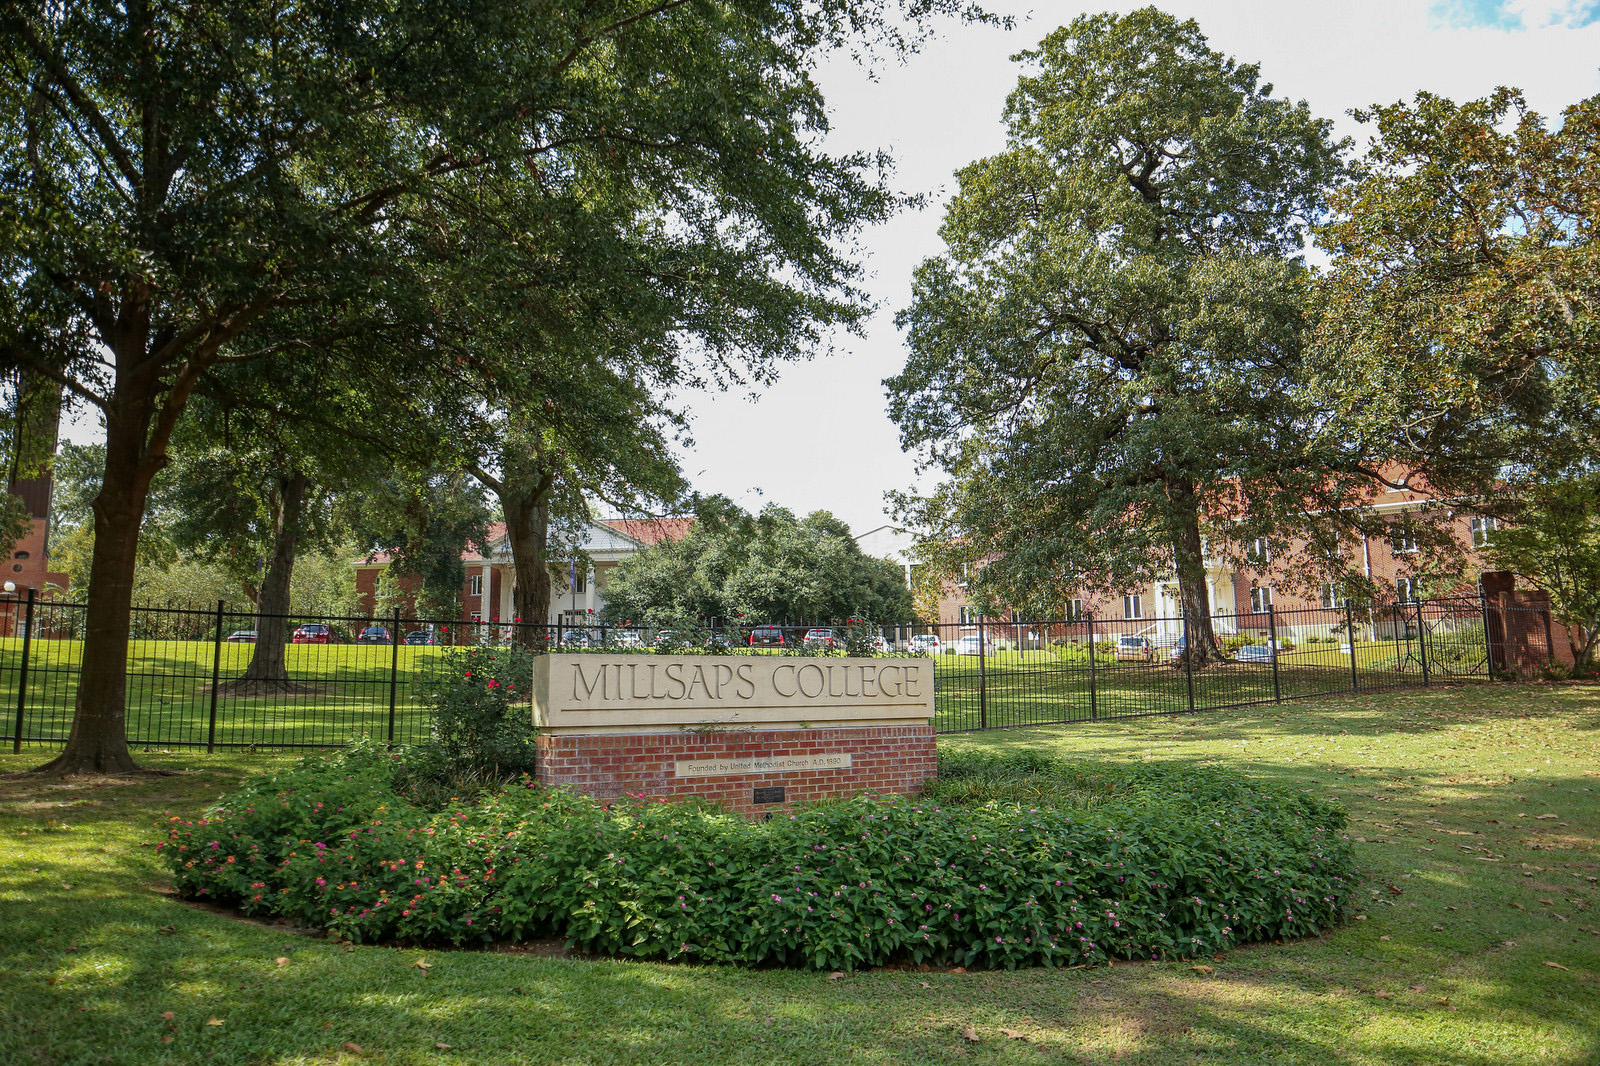 Millsaps College in Jackson, Miss., is among 78 organizations to receive $70 million in grants from the Lilly Endowment. Photo courtesy of Millsaps College.